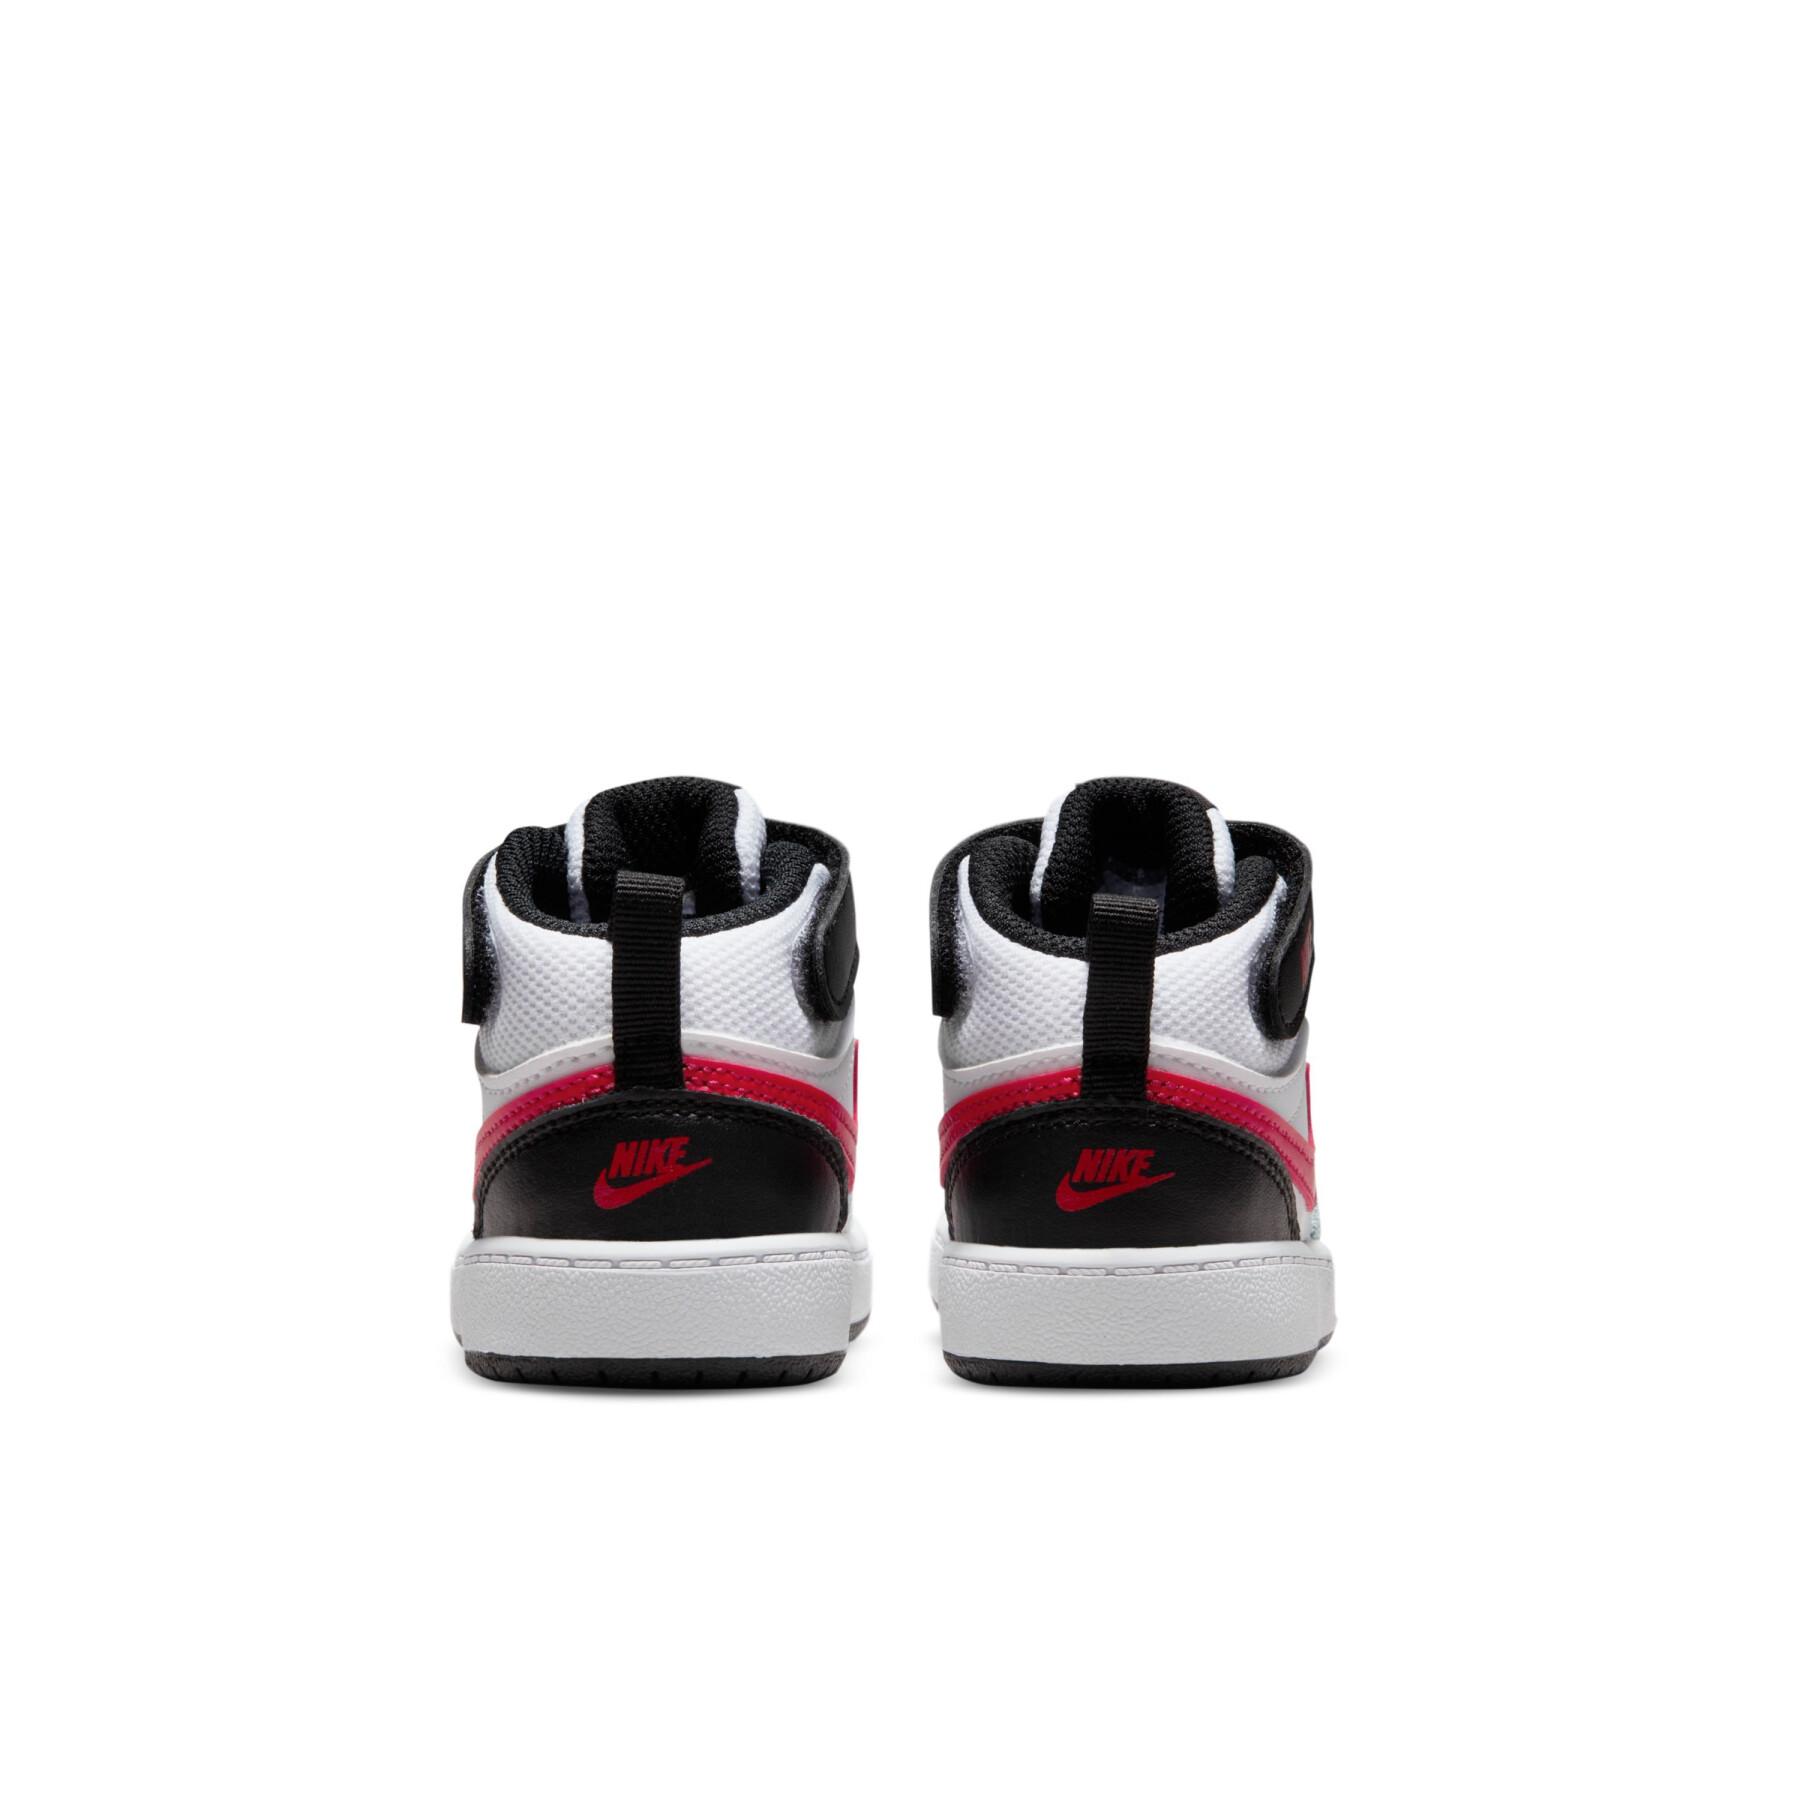 Baby sneakers Nike Court borough Mid 2